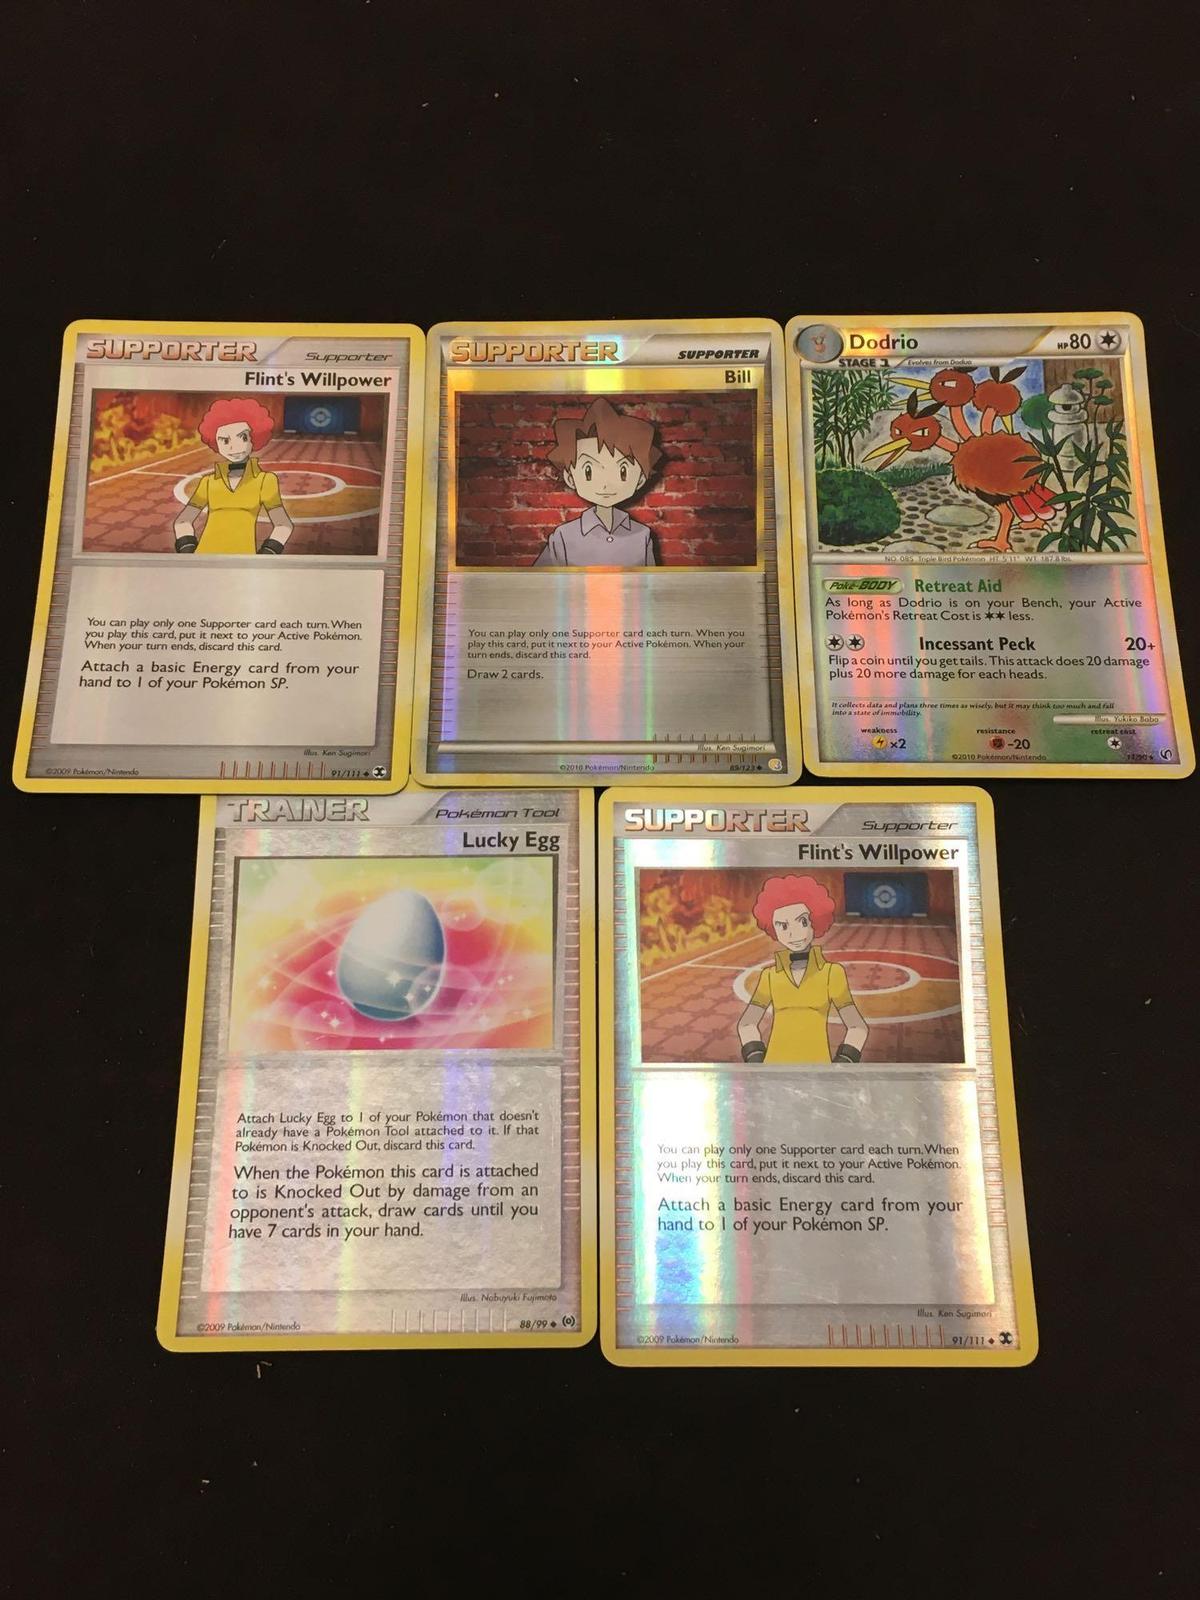 5 Card Lot of Pokemon Rares & Holofoil Cards from Estate Collection